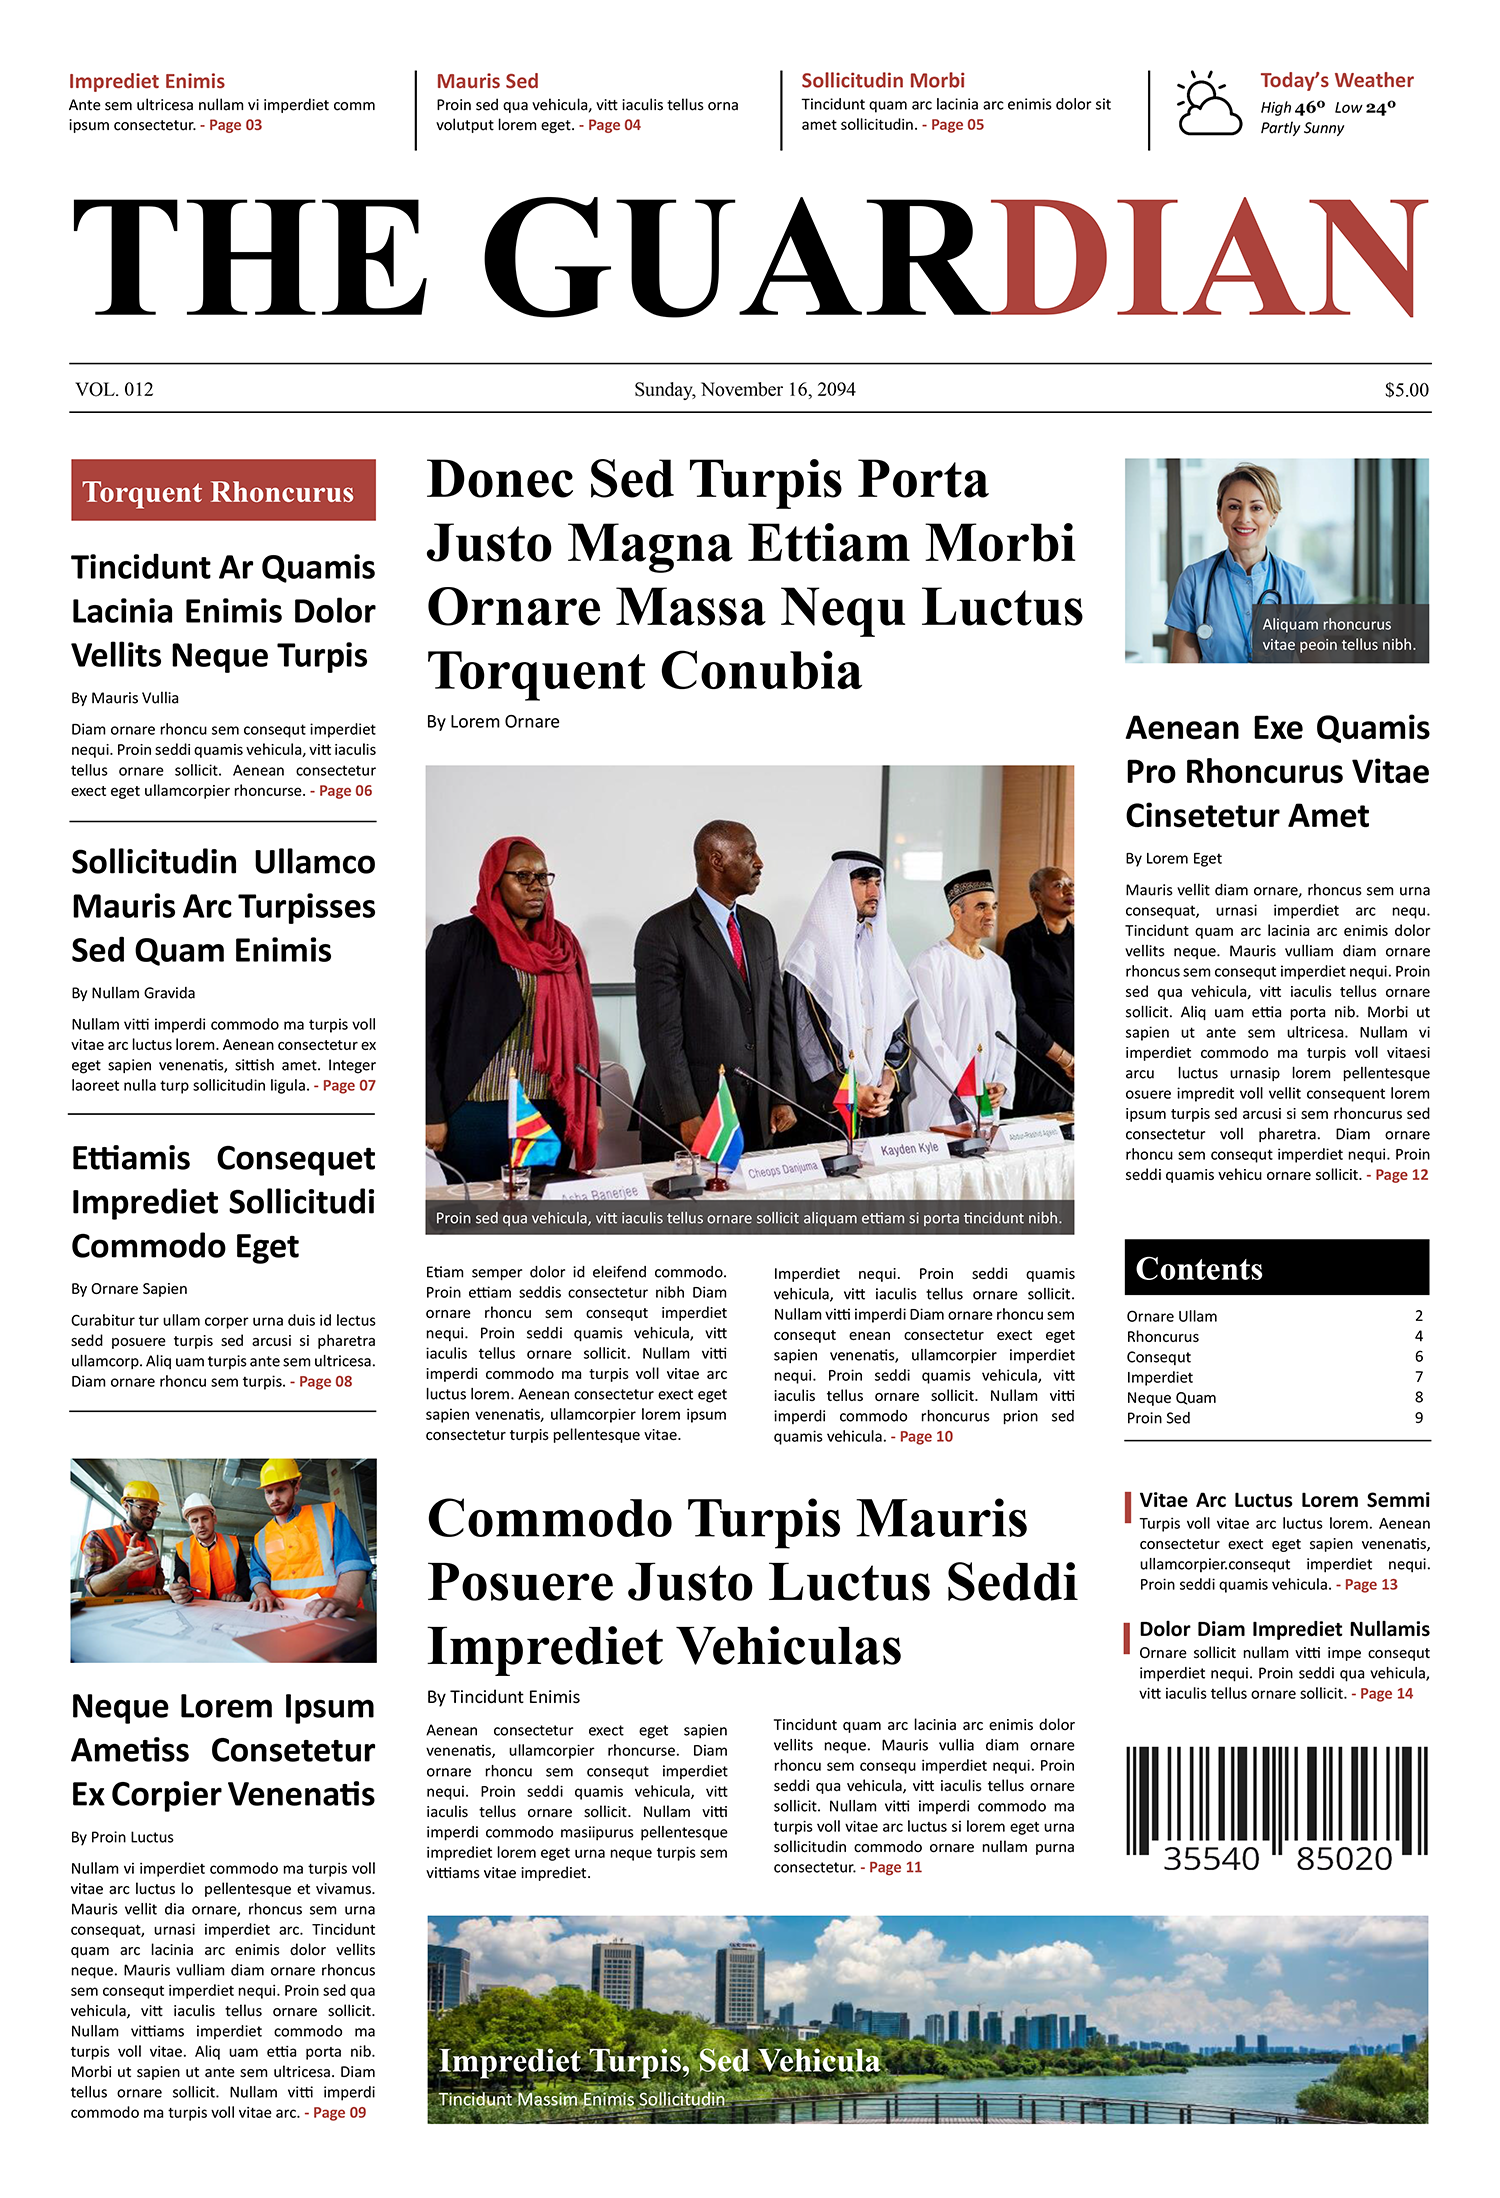 Classic Minimal Newspaper Front Page Template - Page 01